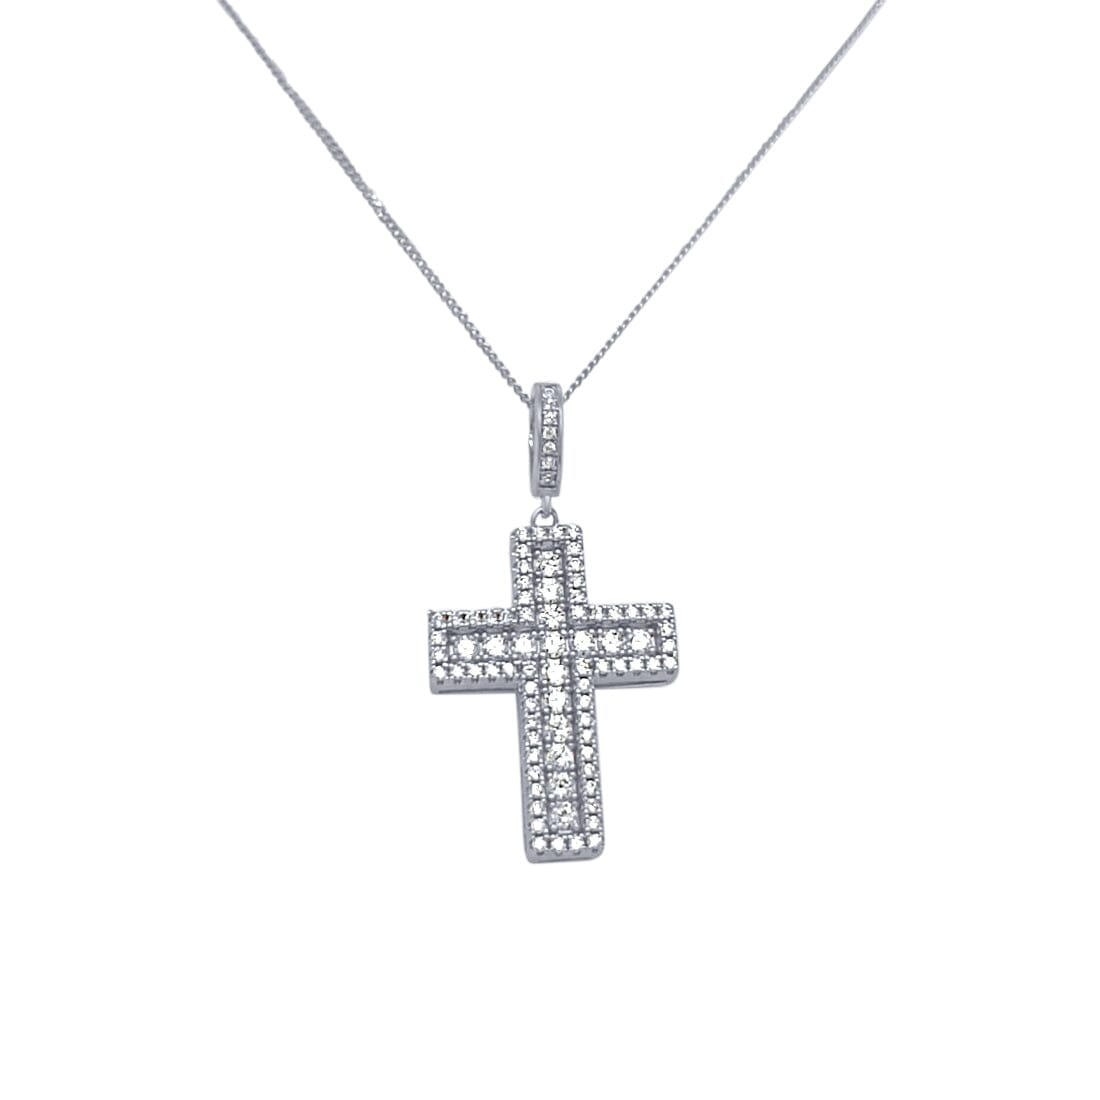 45cm Cross Necklace with Cubic Zirconia in Sterling Silver Necklaces Bevilles 